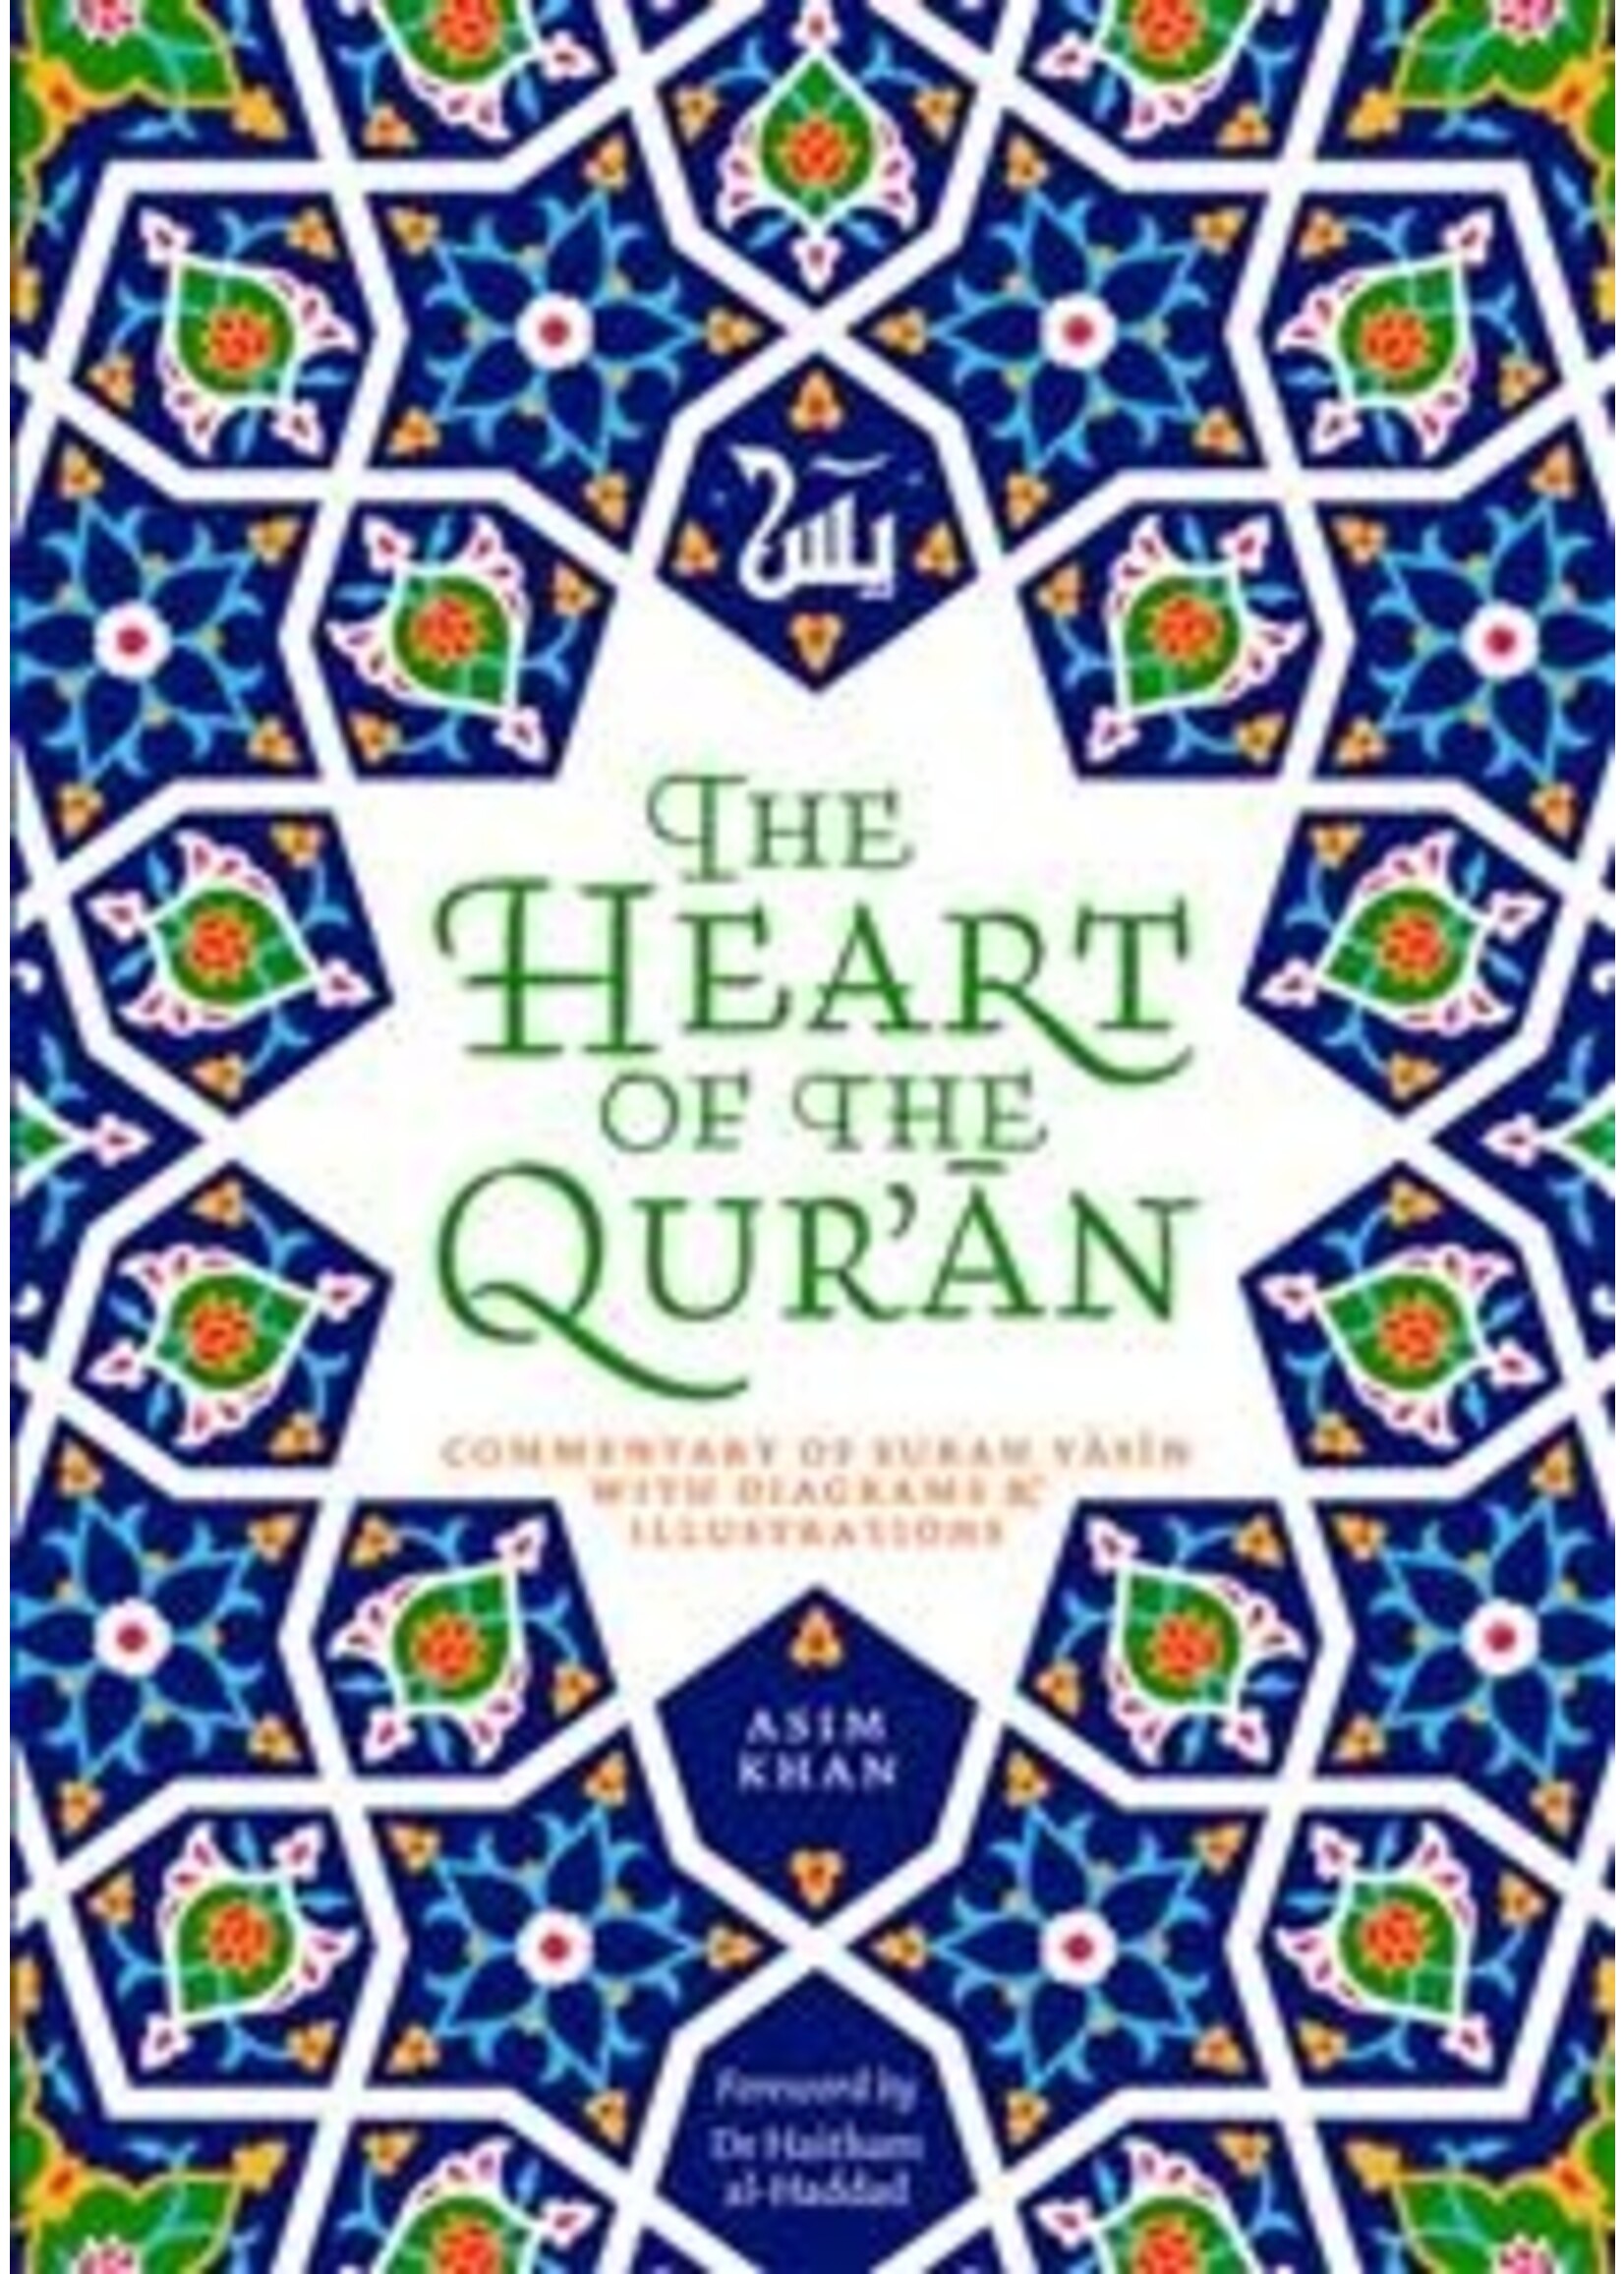 The Heart of the Qur'an: Commentary on Surah Yasin with Diagrams and Illustrations by Asim Khan